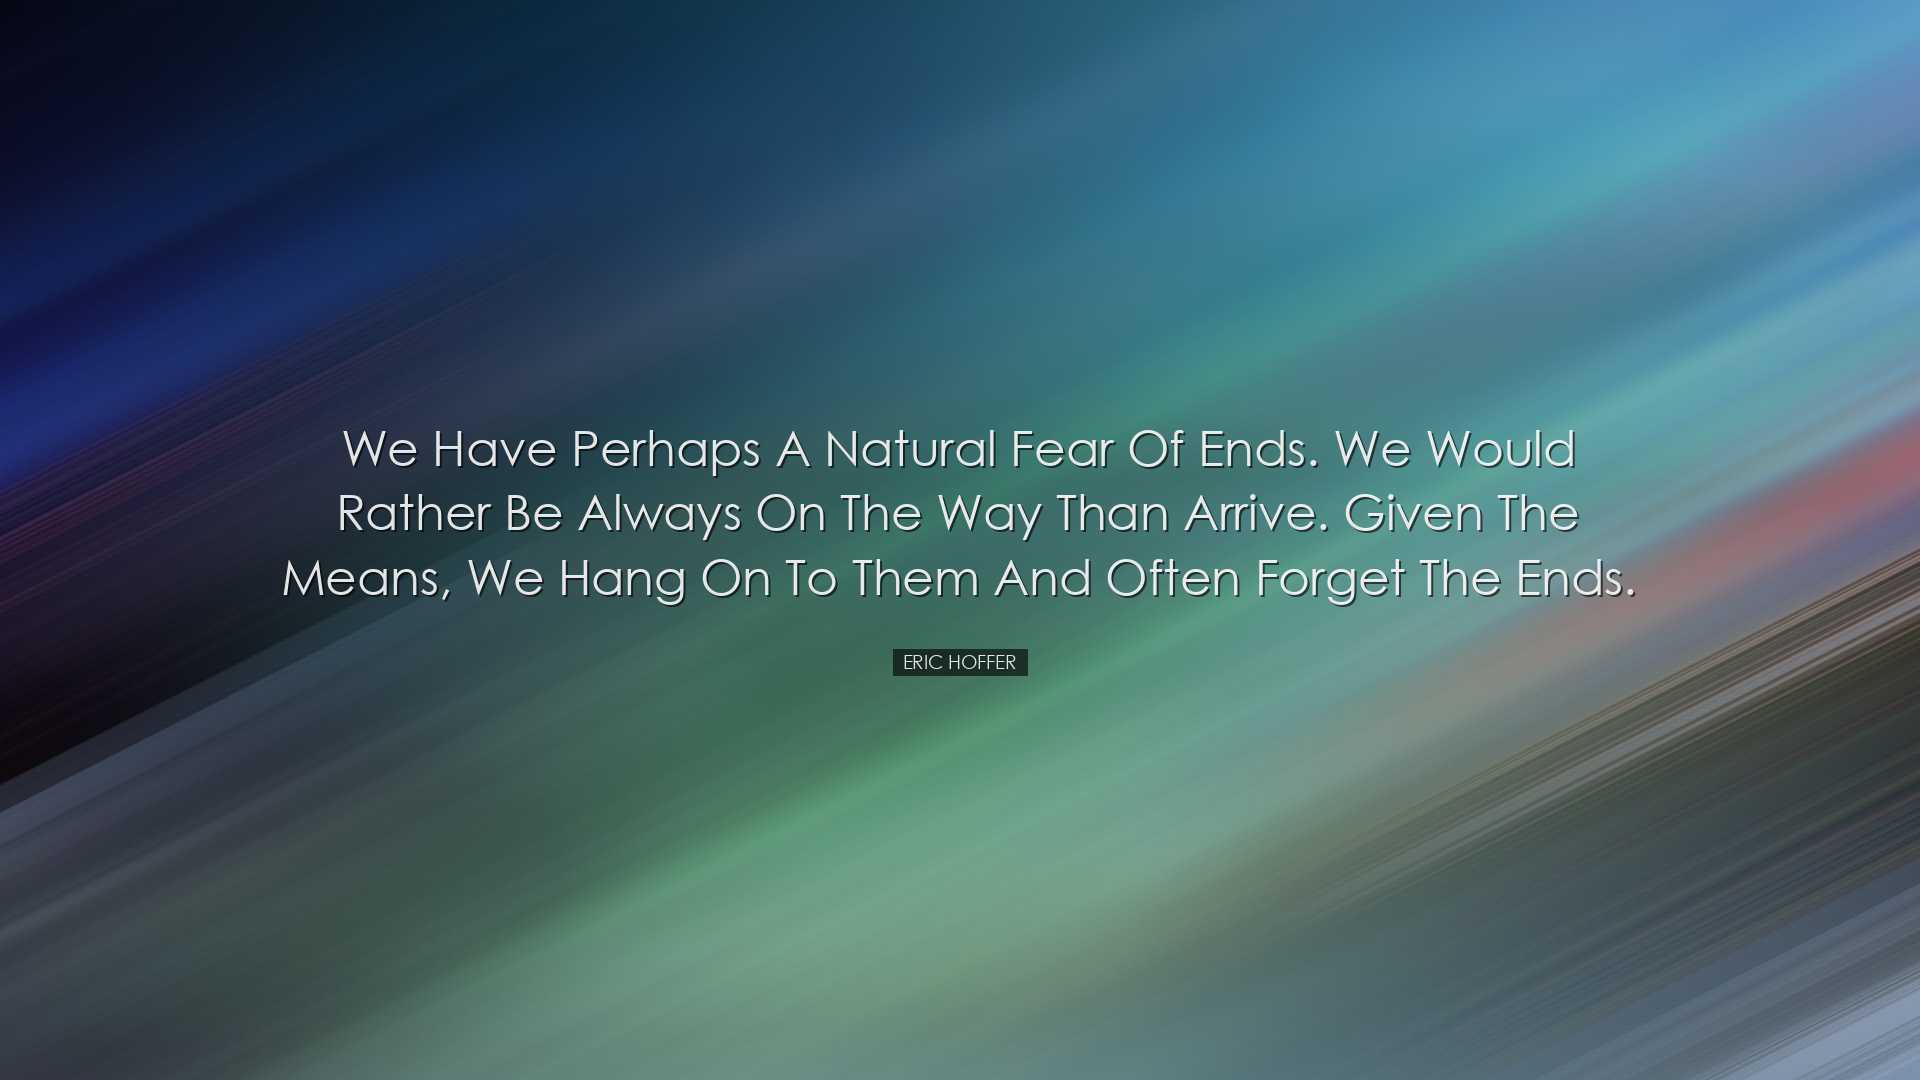 We have perhaps a natural fear of ends. We would rather be always